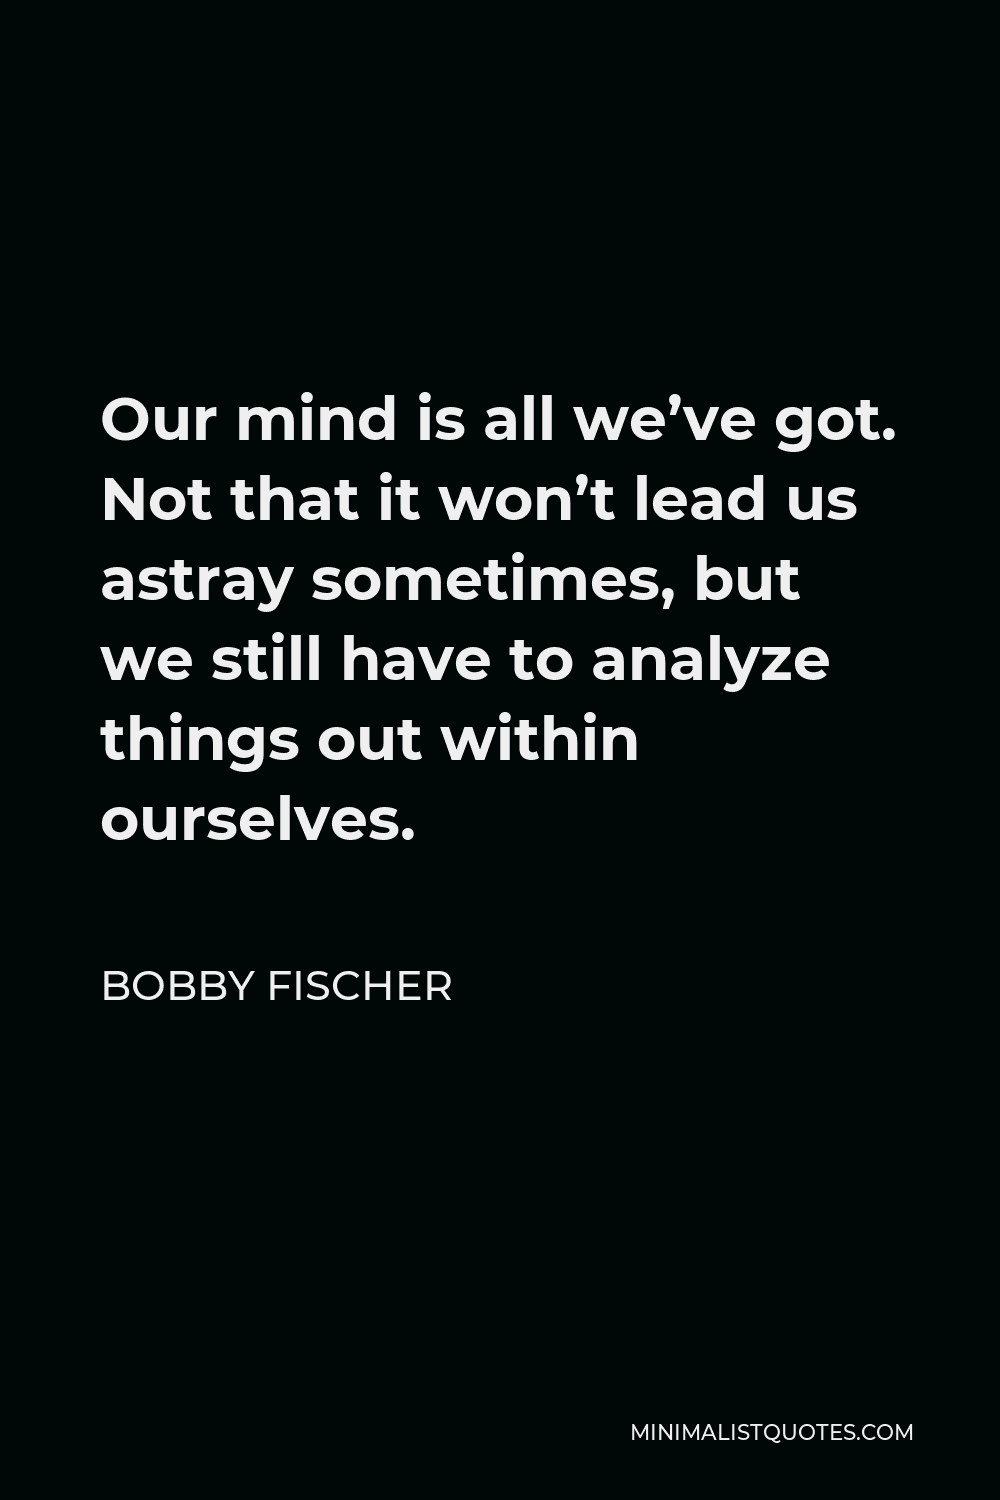 Bobby Fischer Quote - Our mind is all we’ve got. Not that it won’t lead us astray sometimes, but we still have to analyze things out within ourselves.